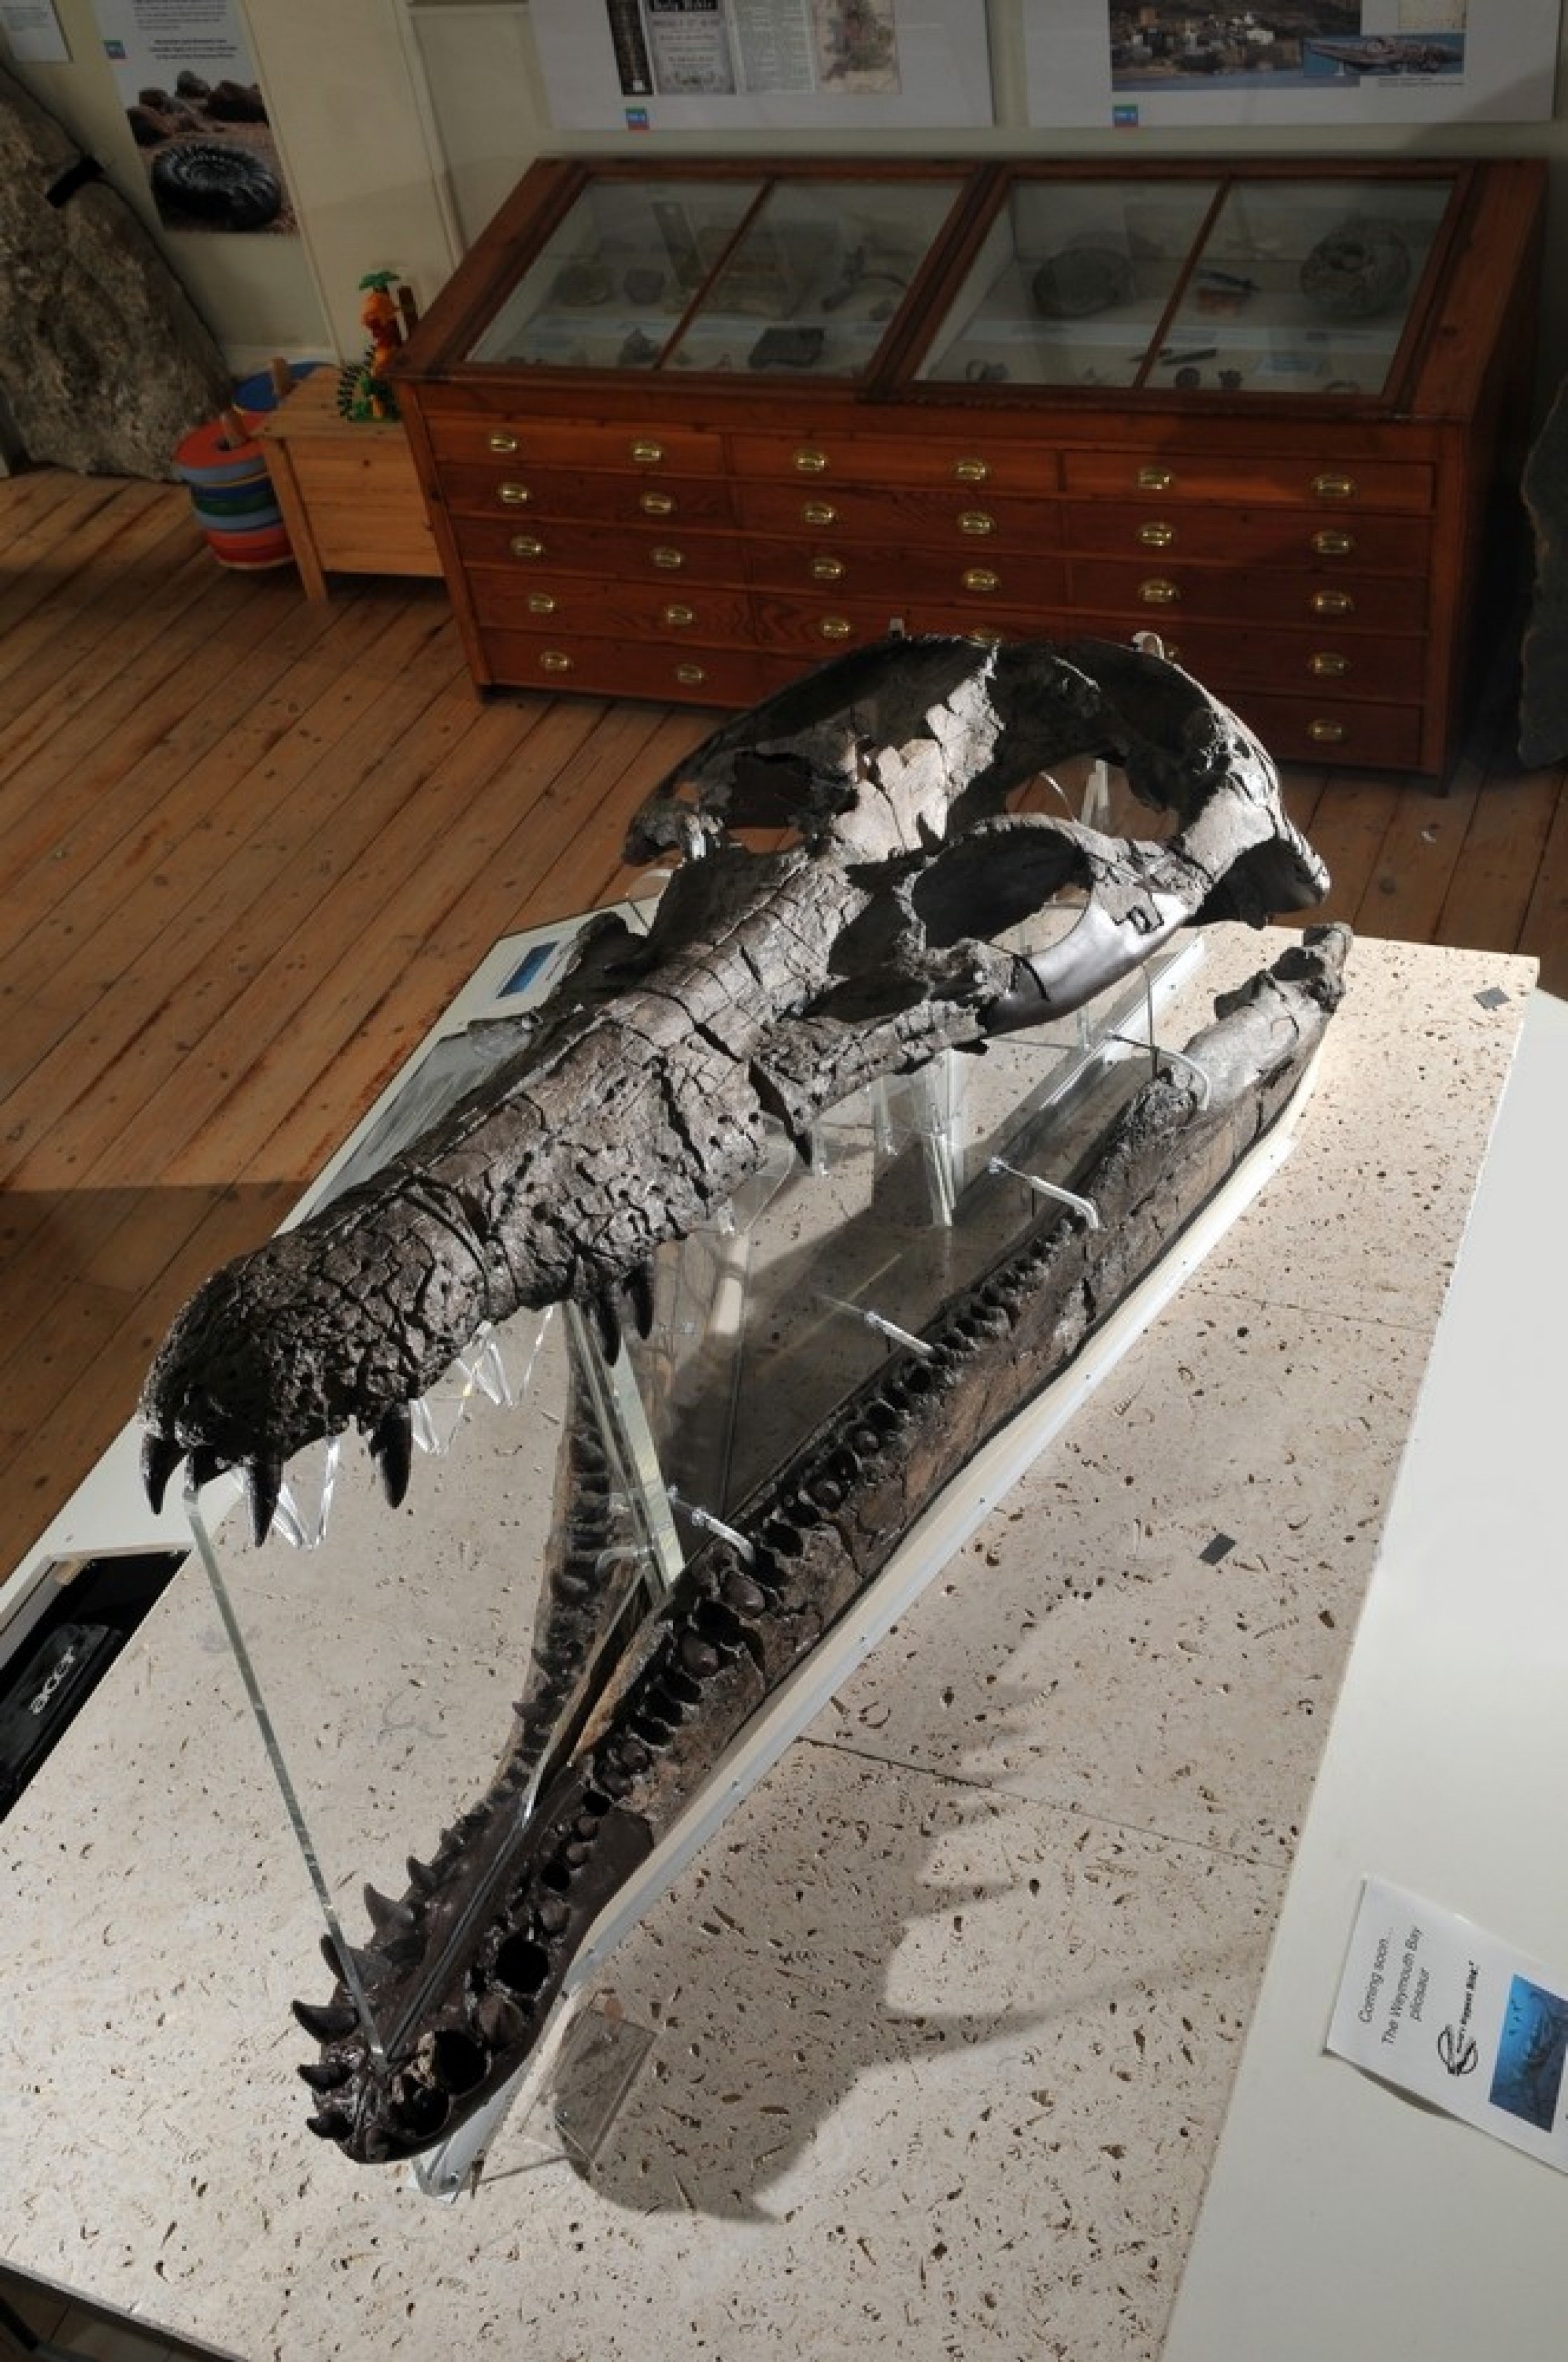 Worlds largest pre-historic Sea Monster skull found.